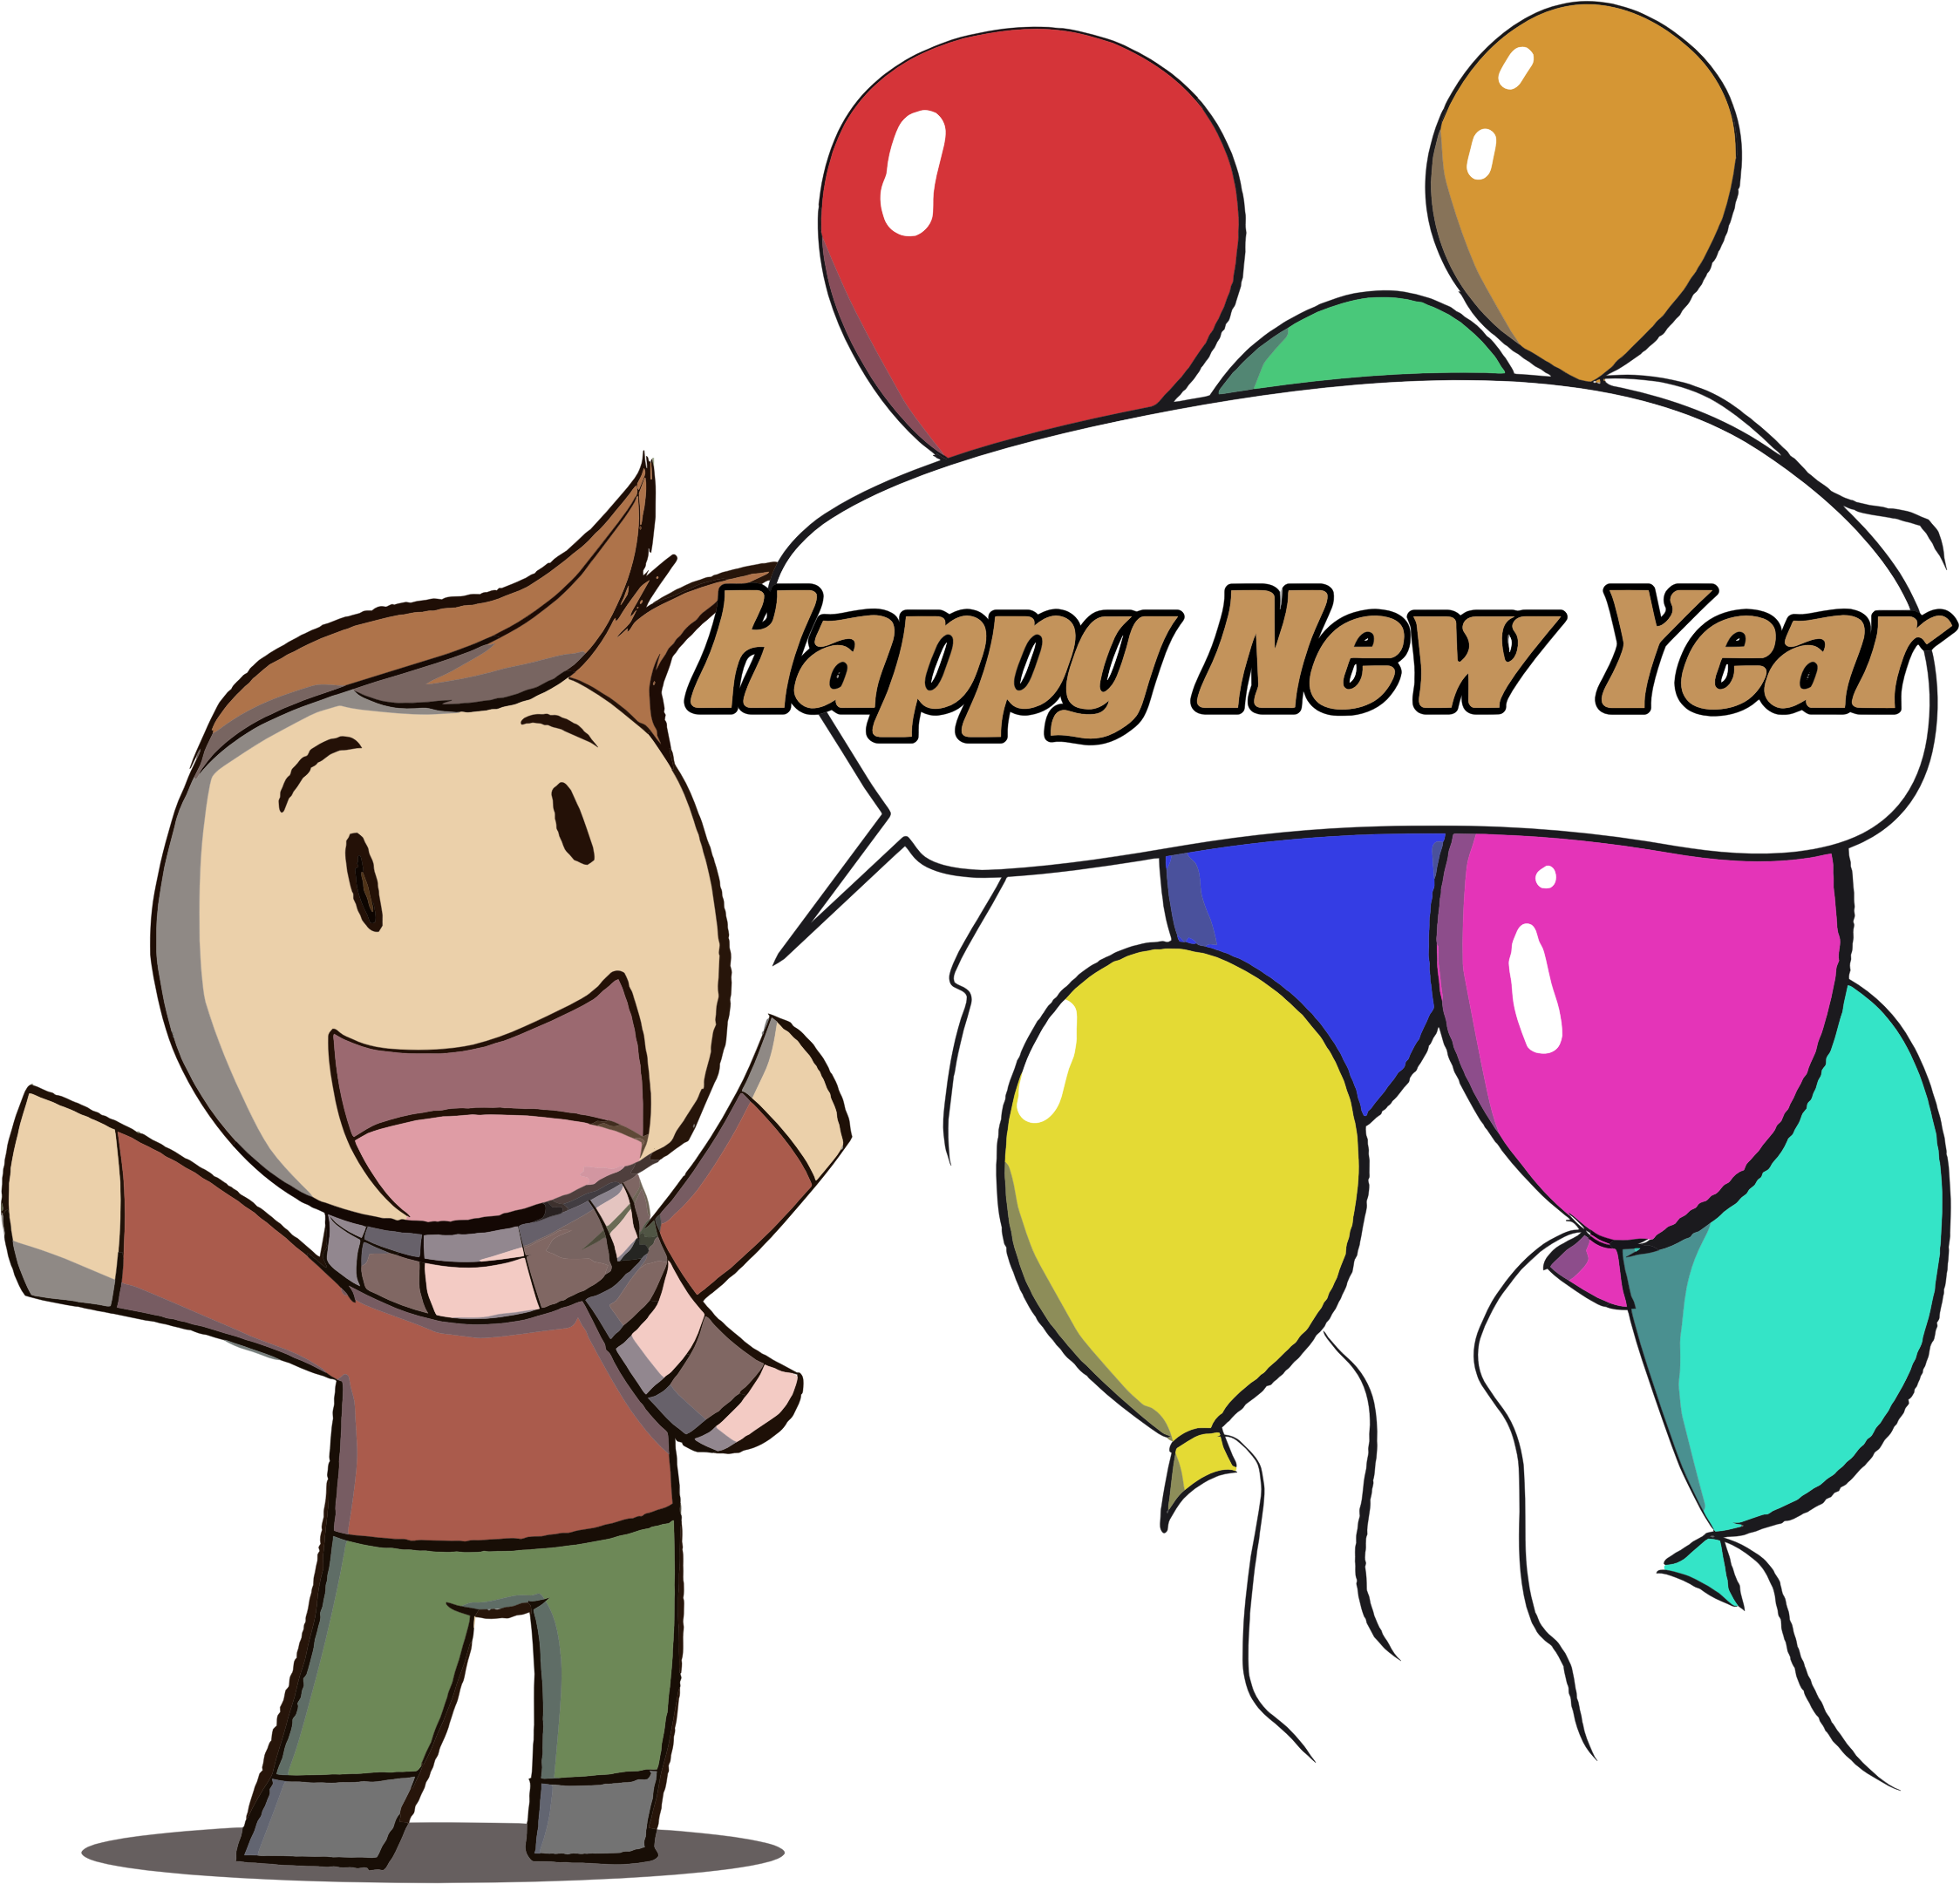 microsoft office clipart new year - photo #7